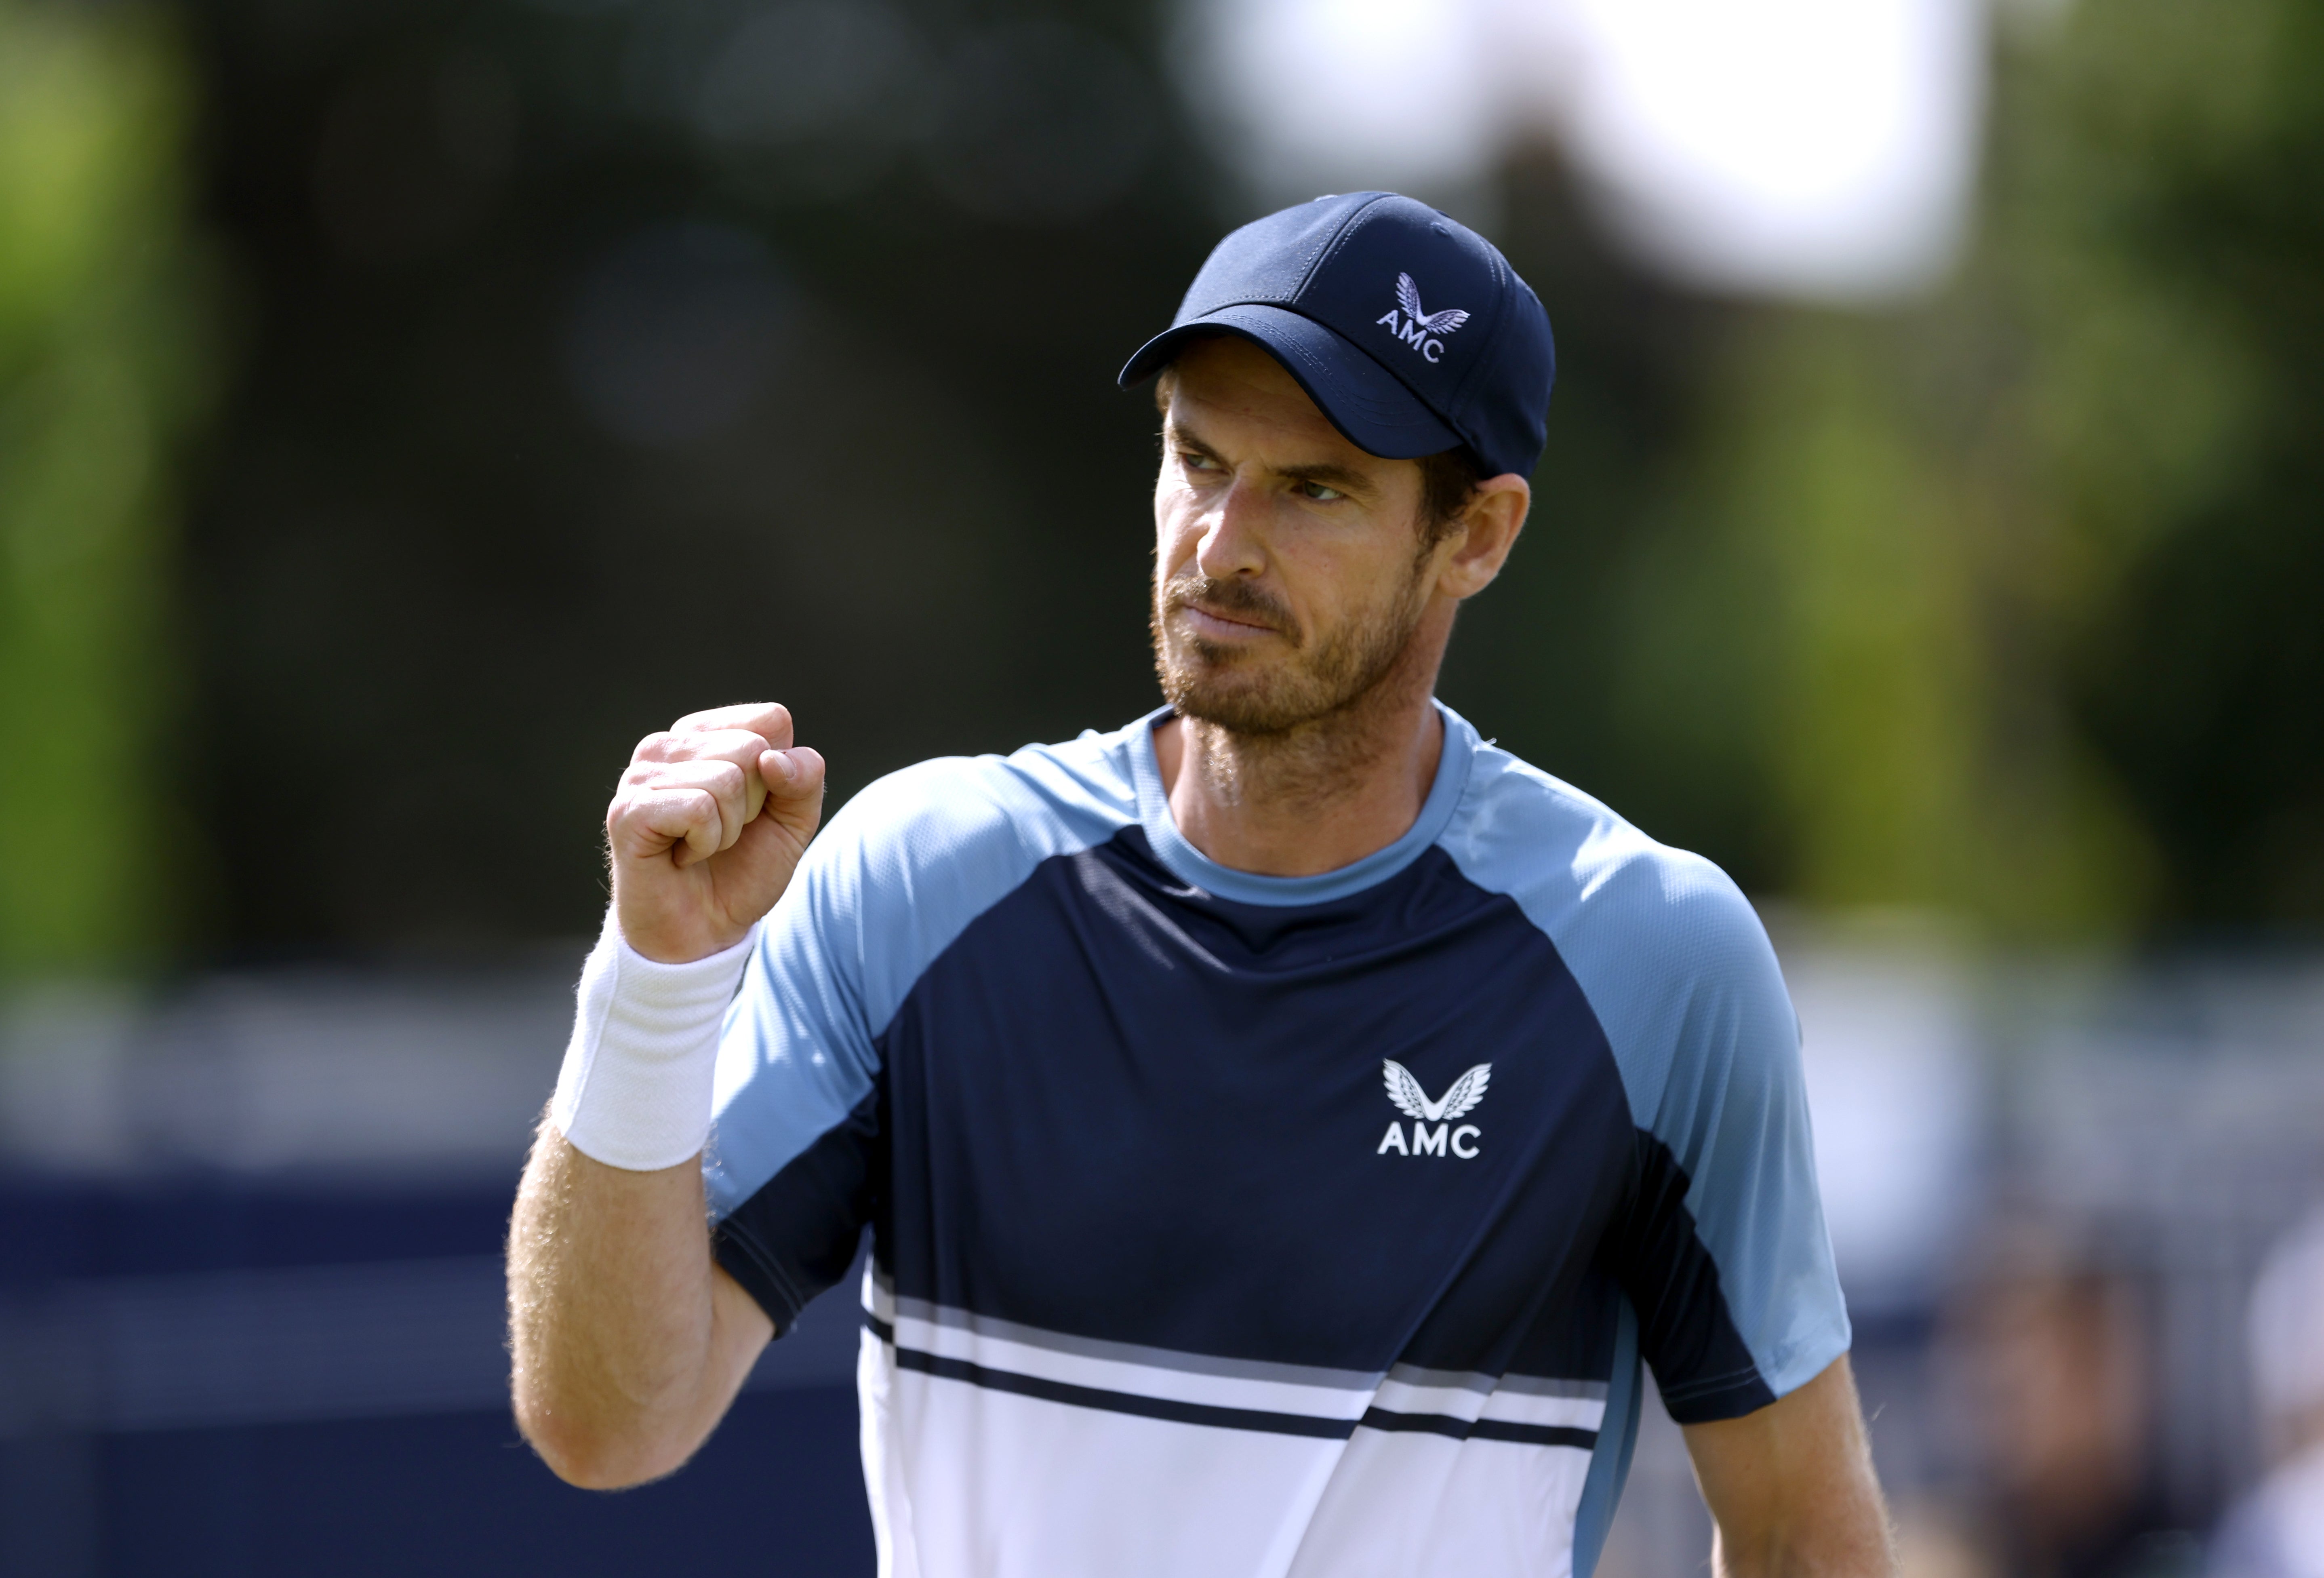 Andy Murray celebrates after victory over Gijs Brouwer to reach the Surbition Trophy quarter-finals